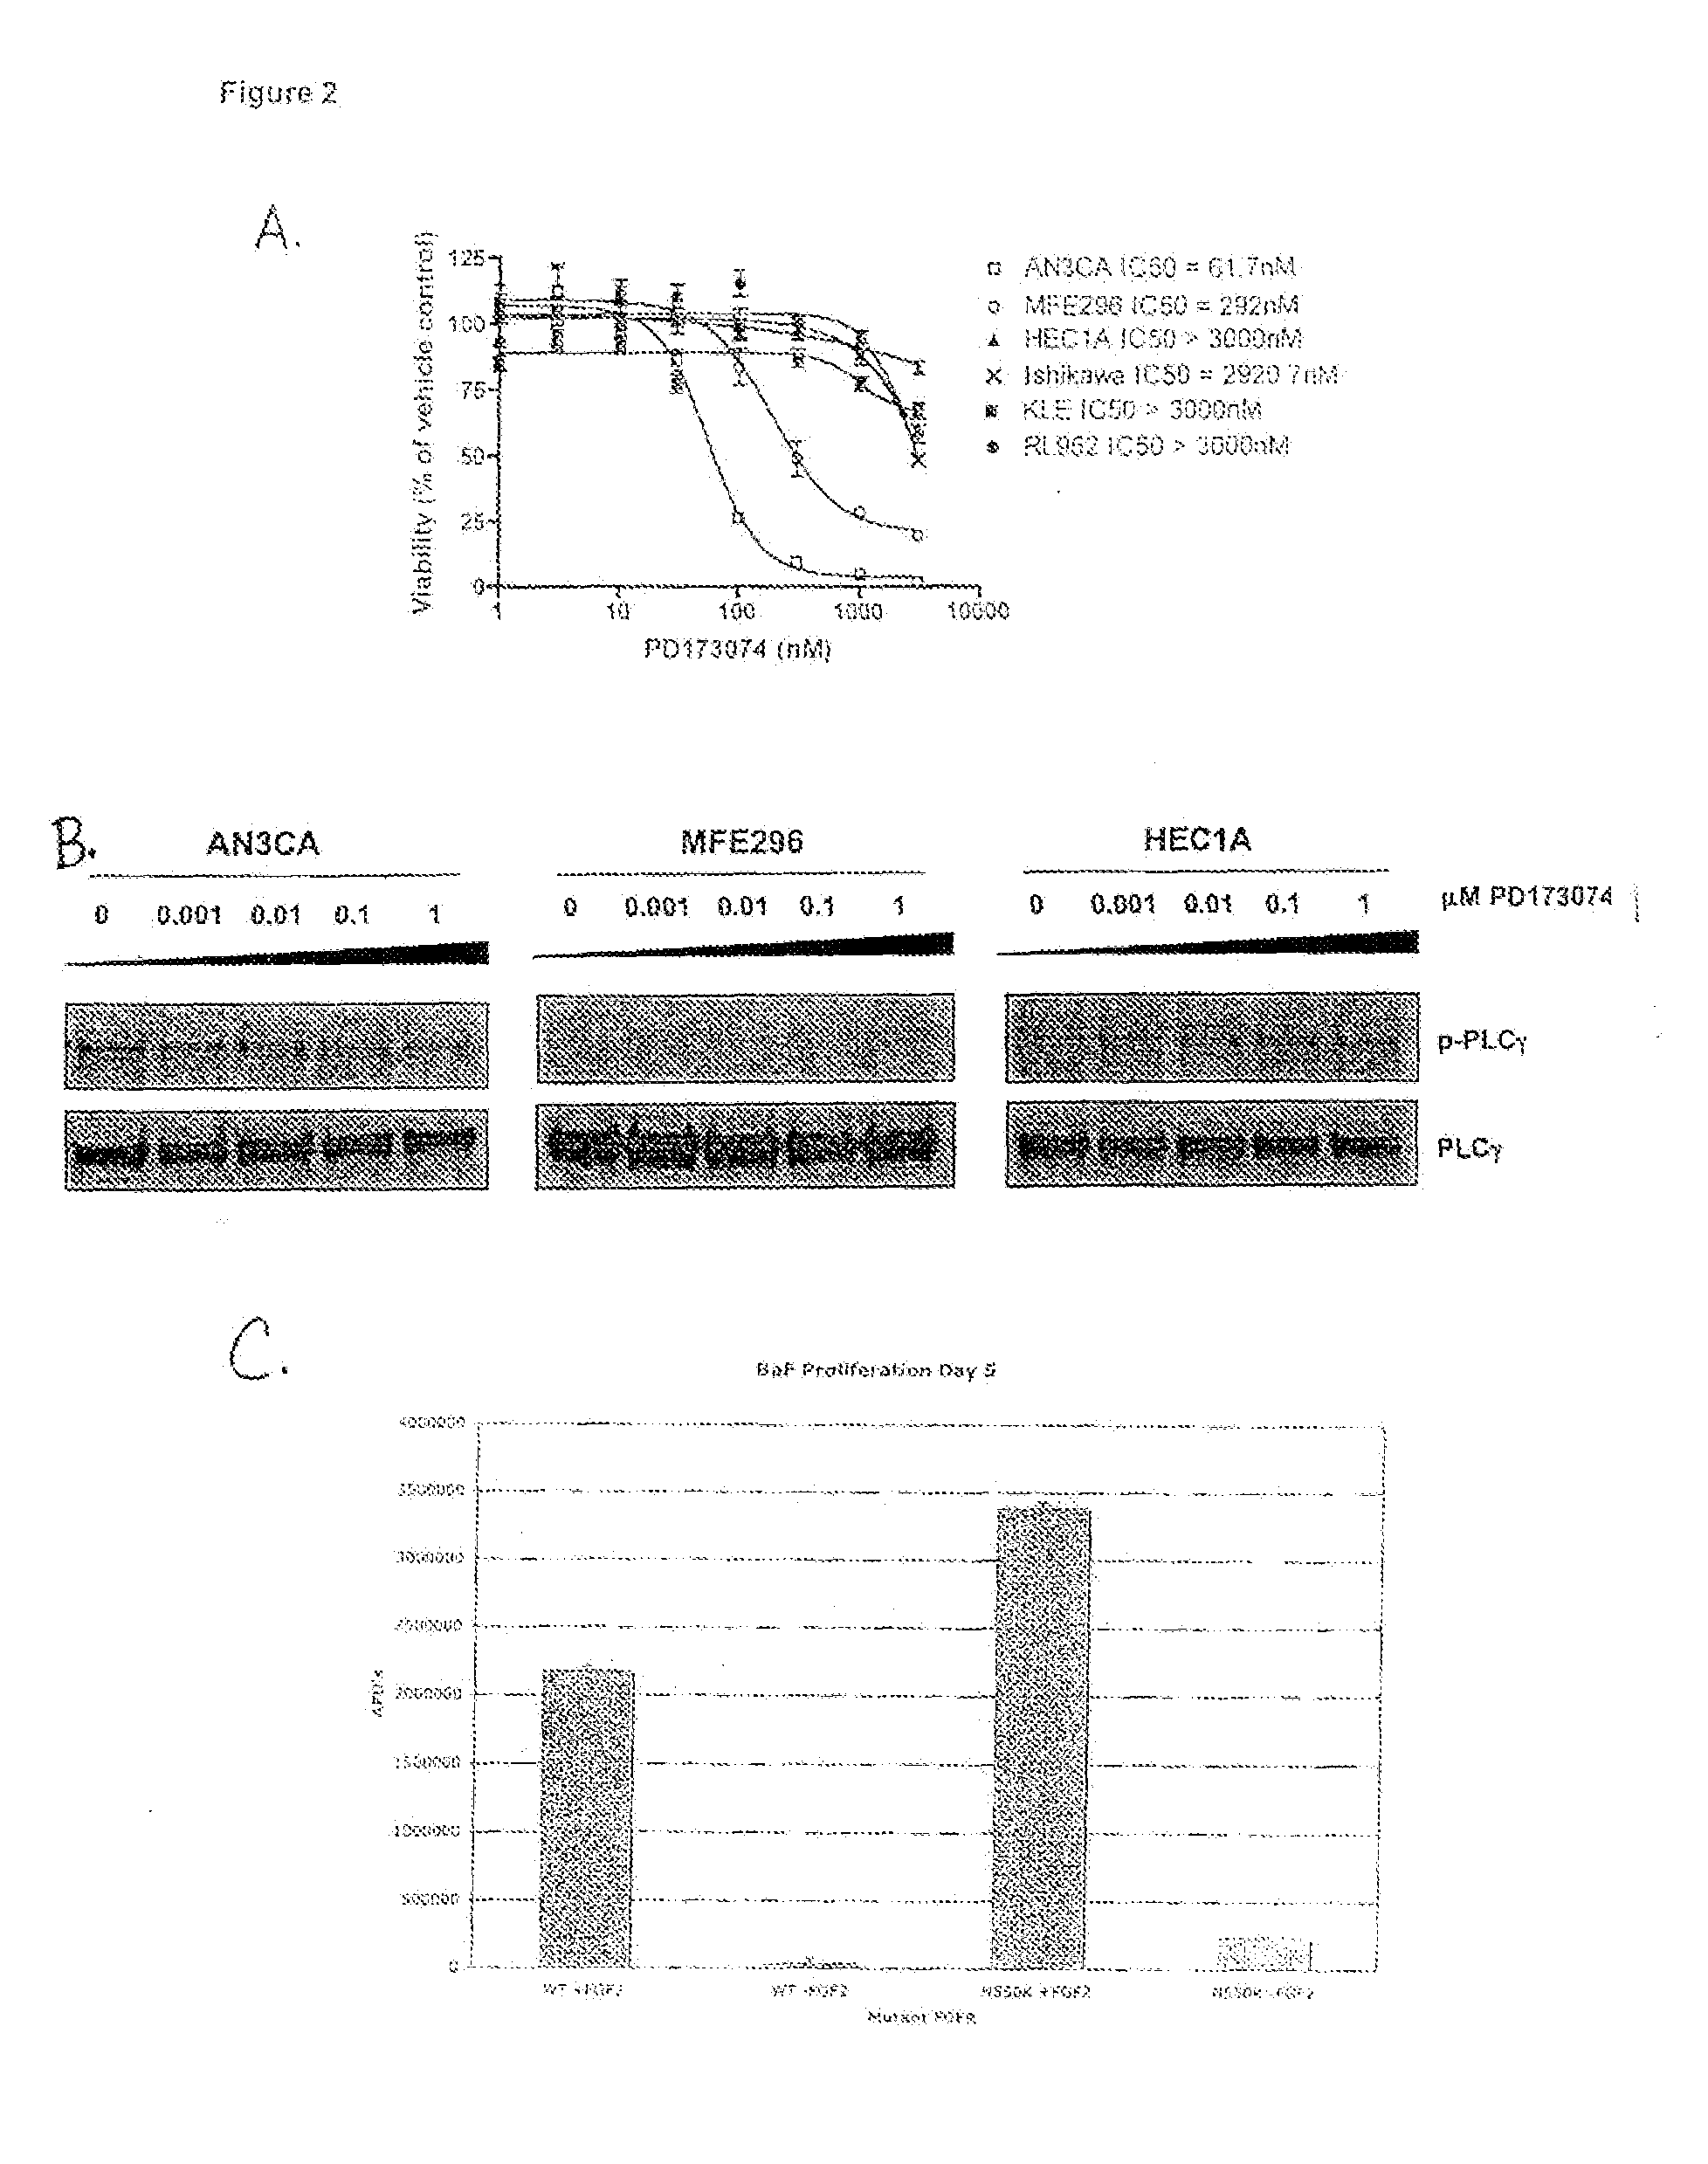 Method of diagnosing, classifying and treating endometrial cancer and precancer